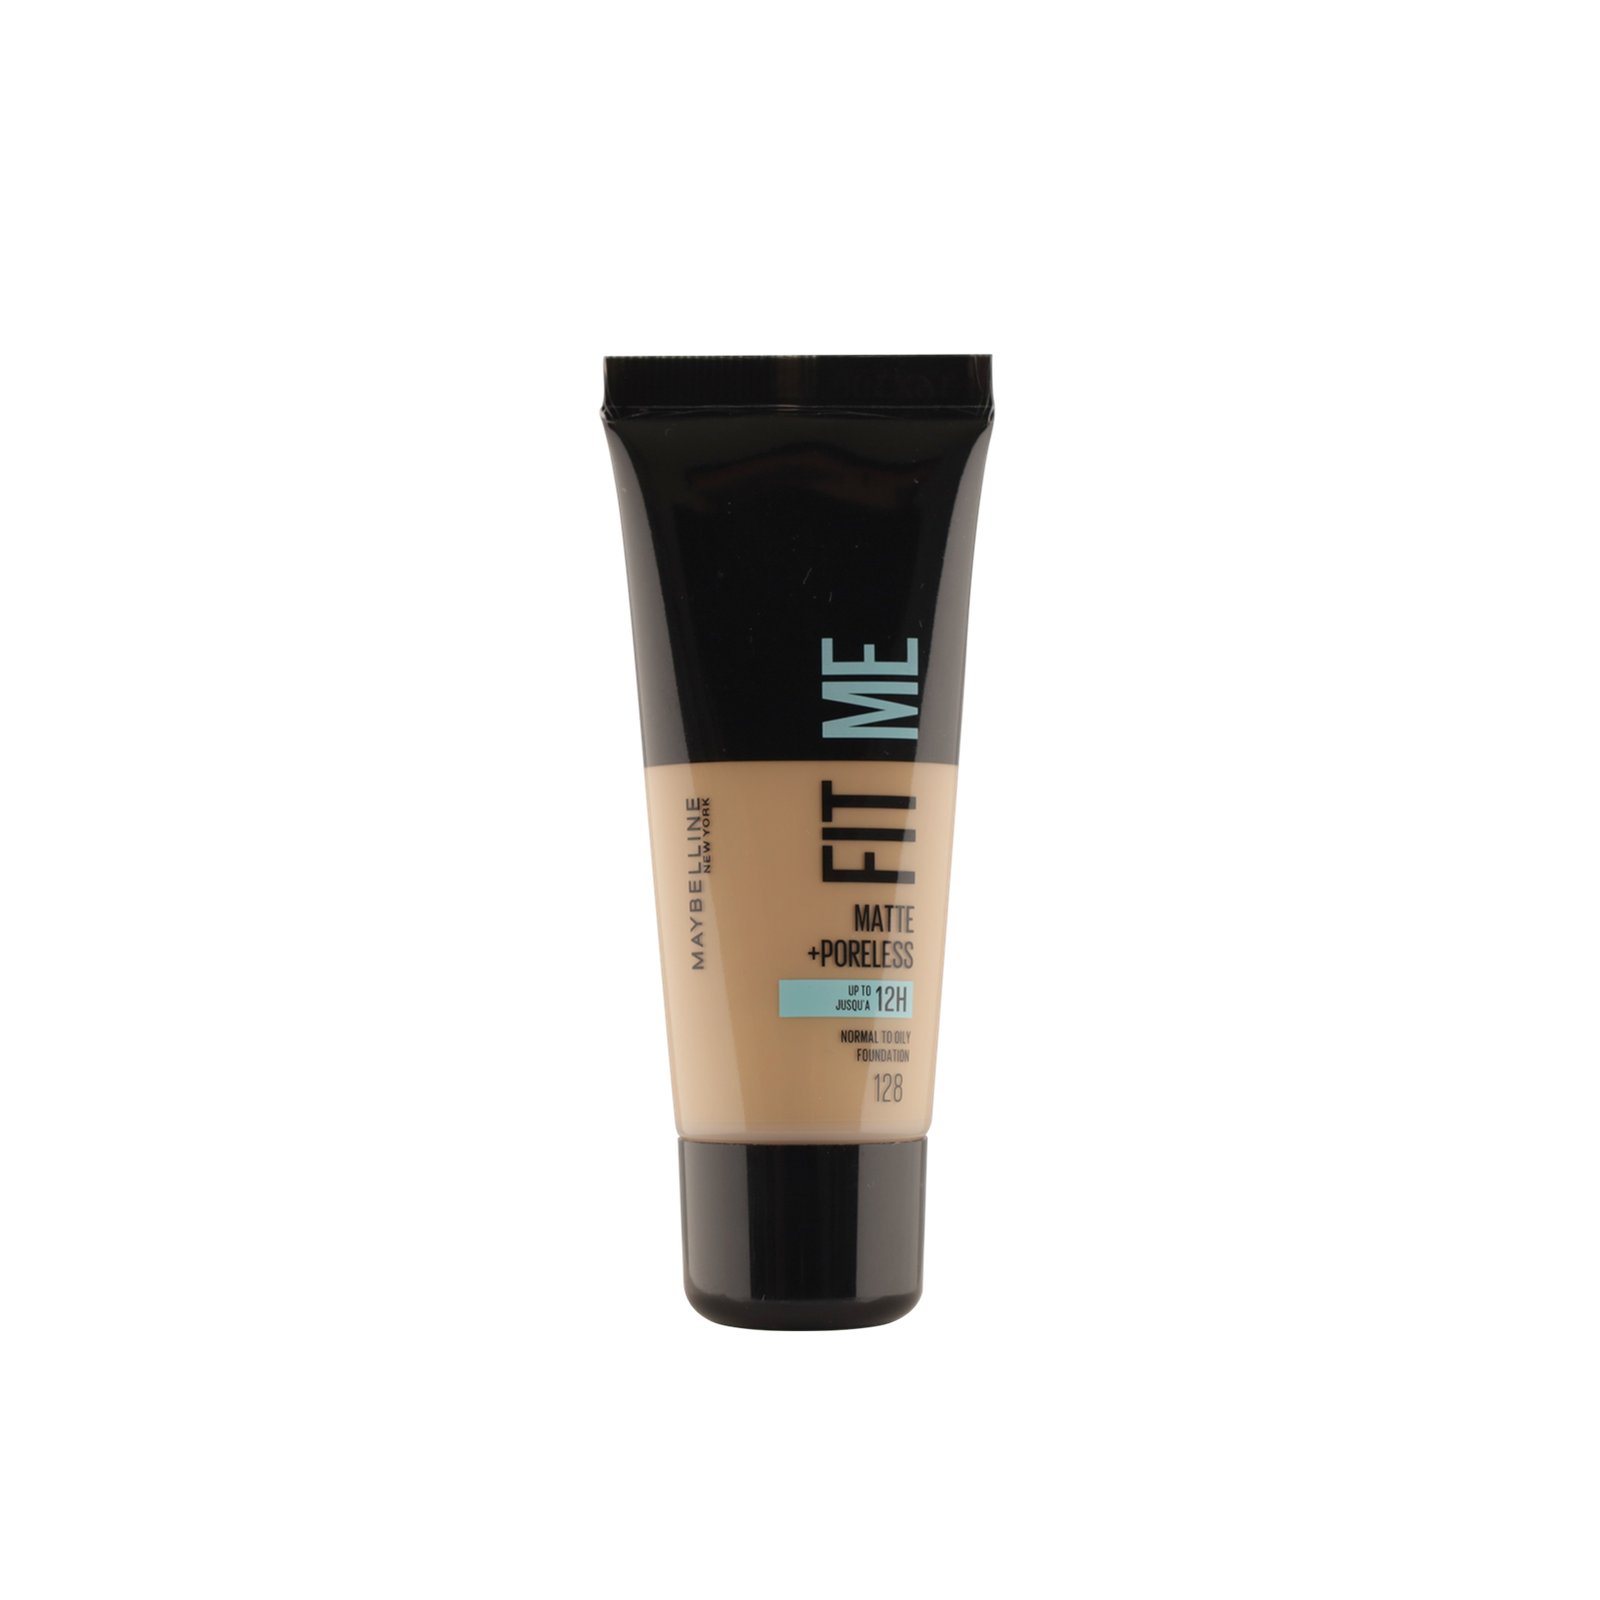 https://static.beautytocare.com/cdn-cgi/image/width=1600,height=1600,f=auto/media/catalog/product//m/a/maybelline-fit-me-matte-poreless-foundation-128-warm-nude-30ml.png